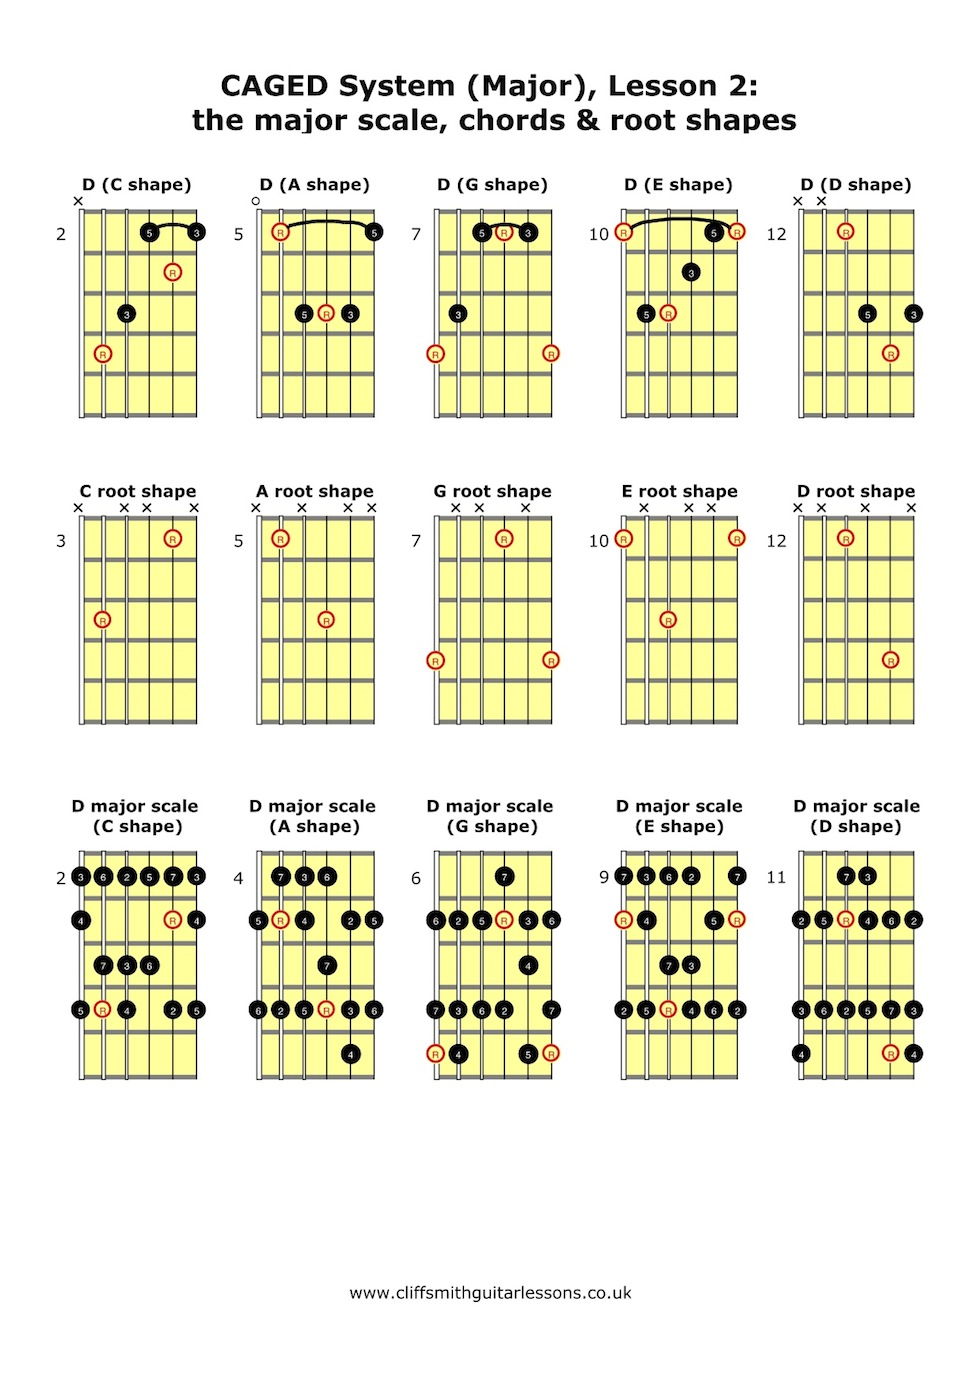 CAGED system - major - lesson 2 - Cliff Smith Guitar Lessons London